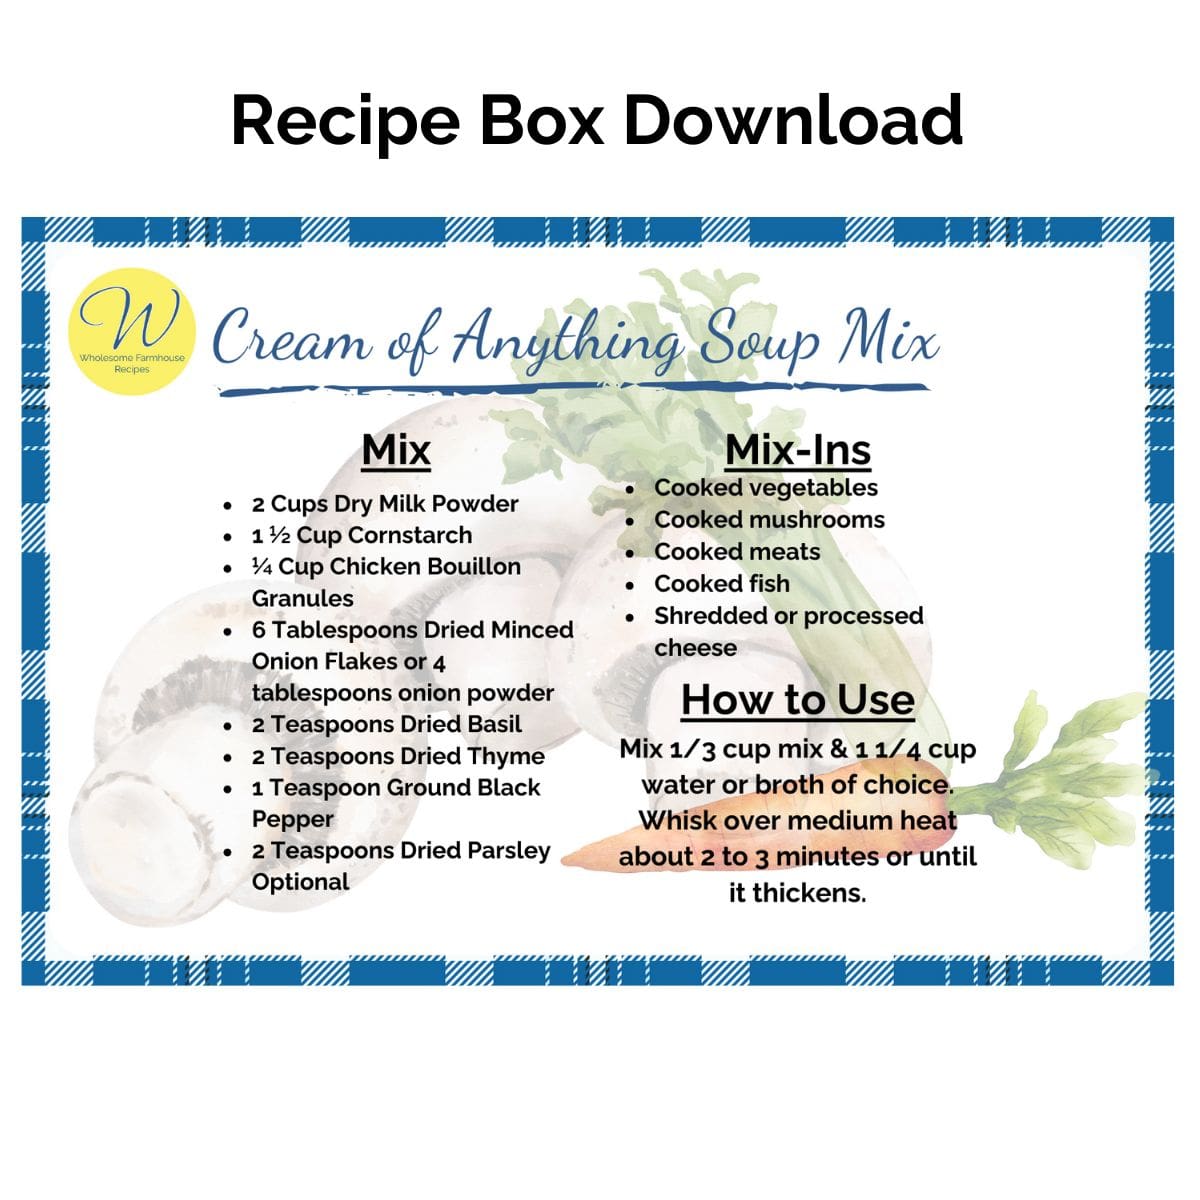 Recipe Box Download - Cream of Anything Soup Mix